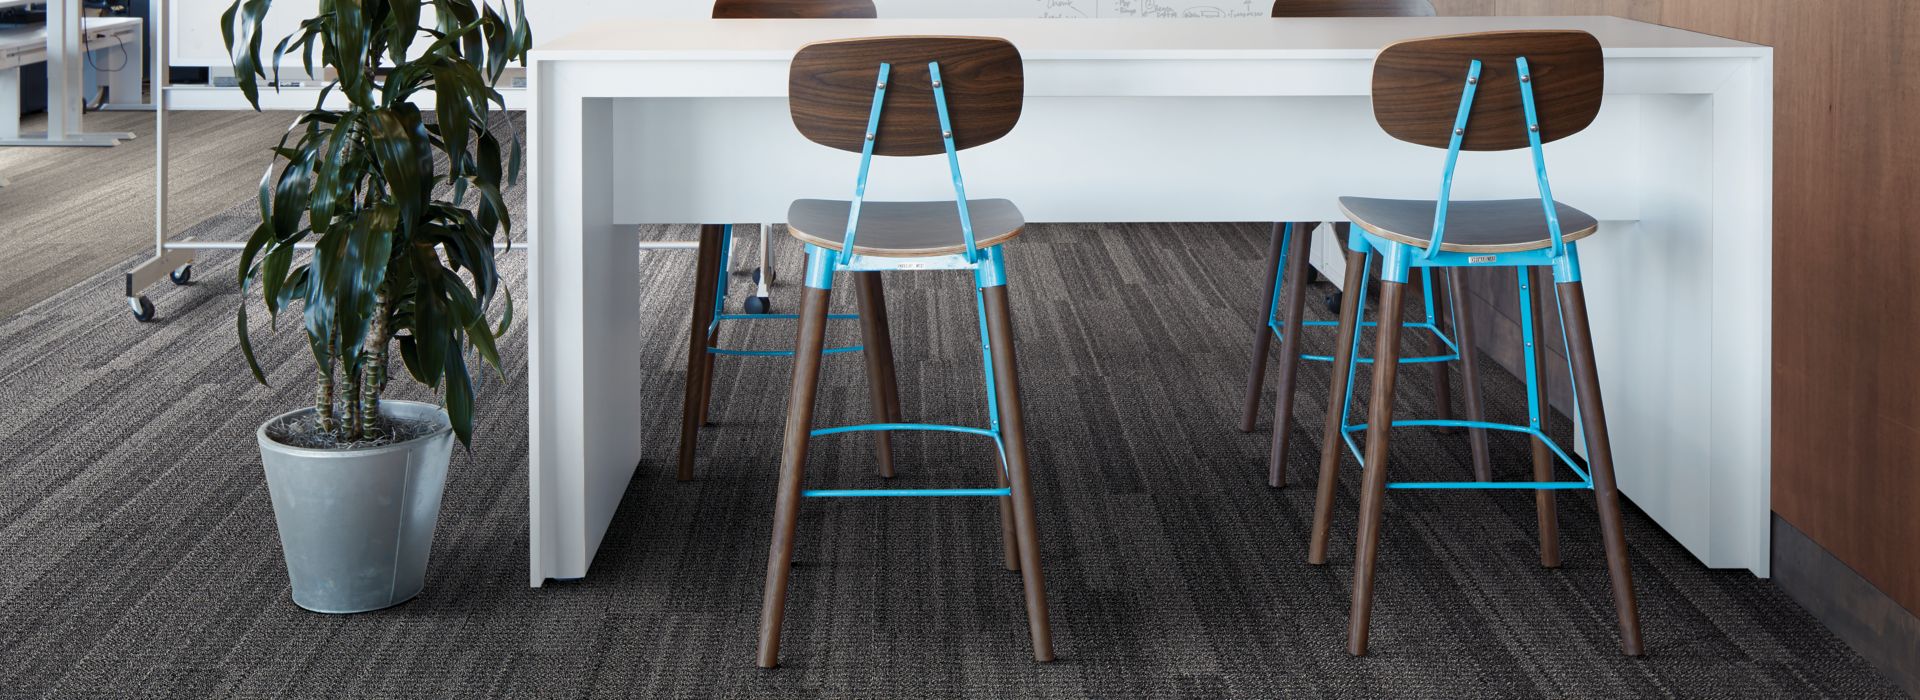 Interface Stitchery plank carpet tile seating area with high top tables and stools  image number 1